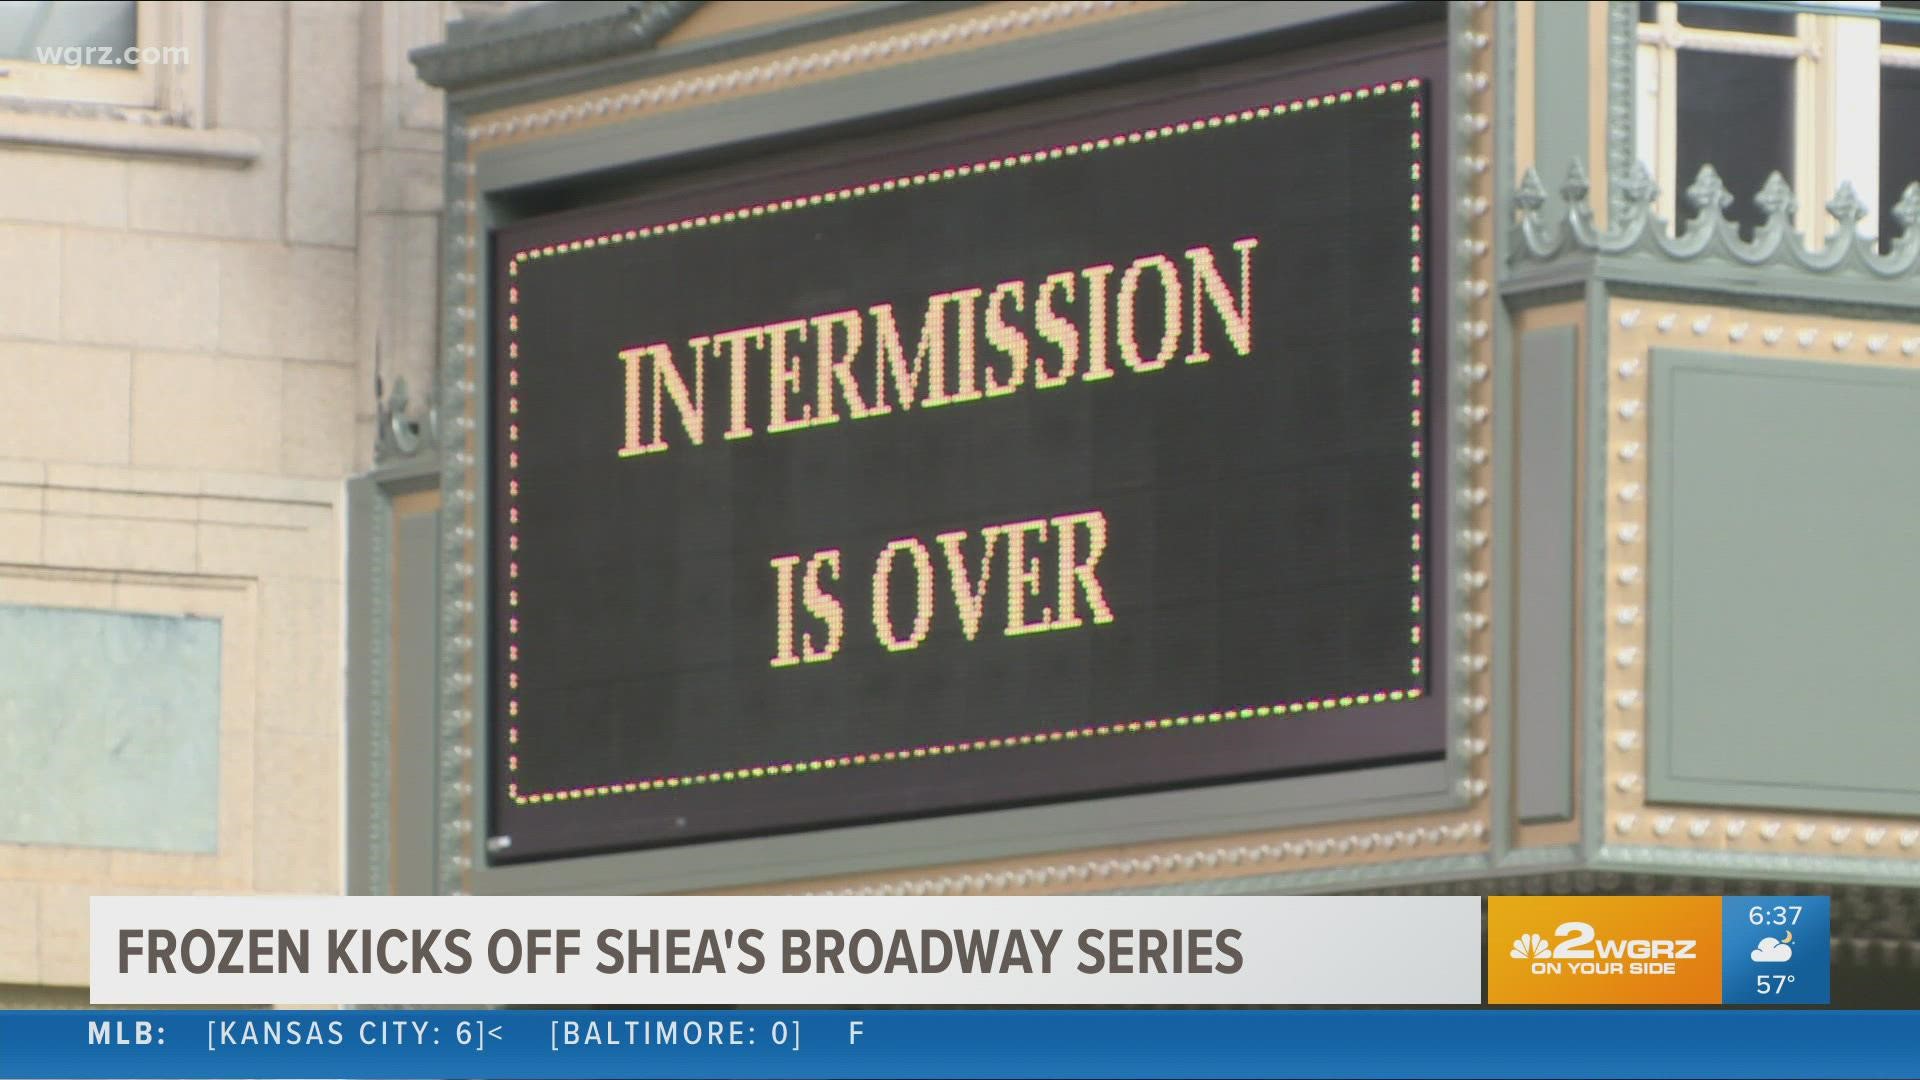 President of Shea's, Michael G. Murphy says he's been working with staff for weeks to make sure the curtain goes up.